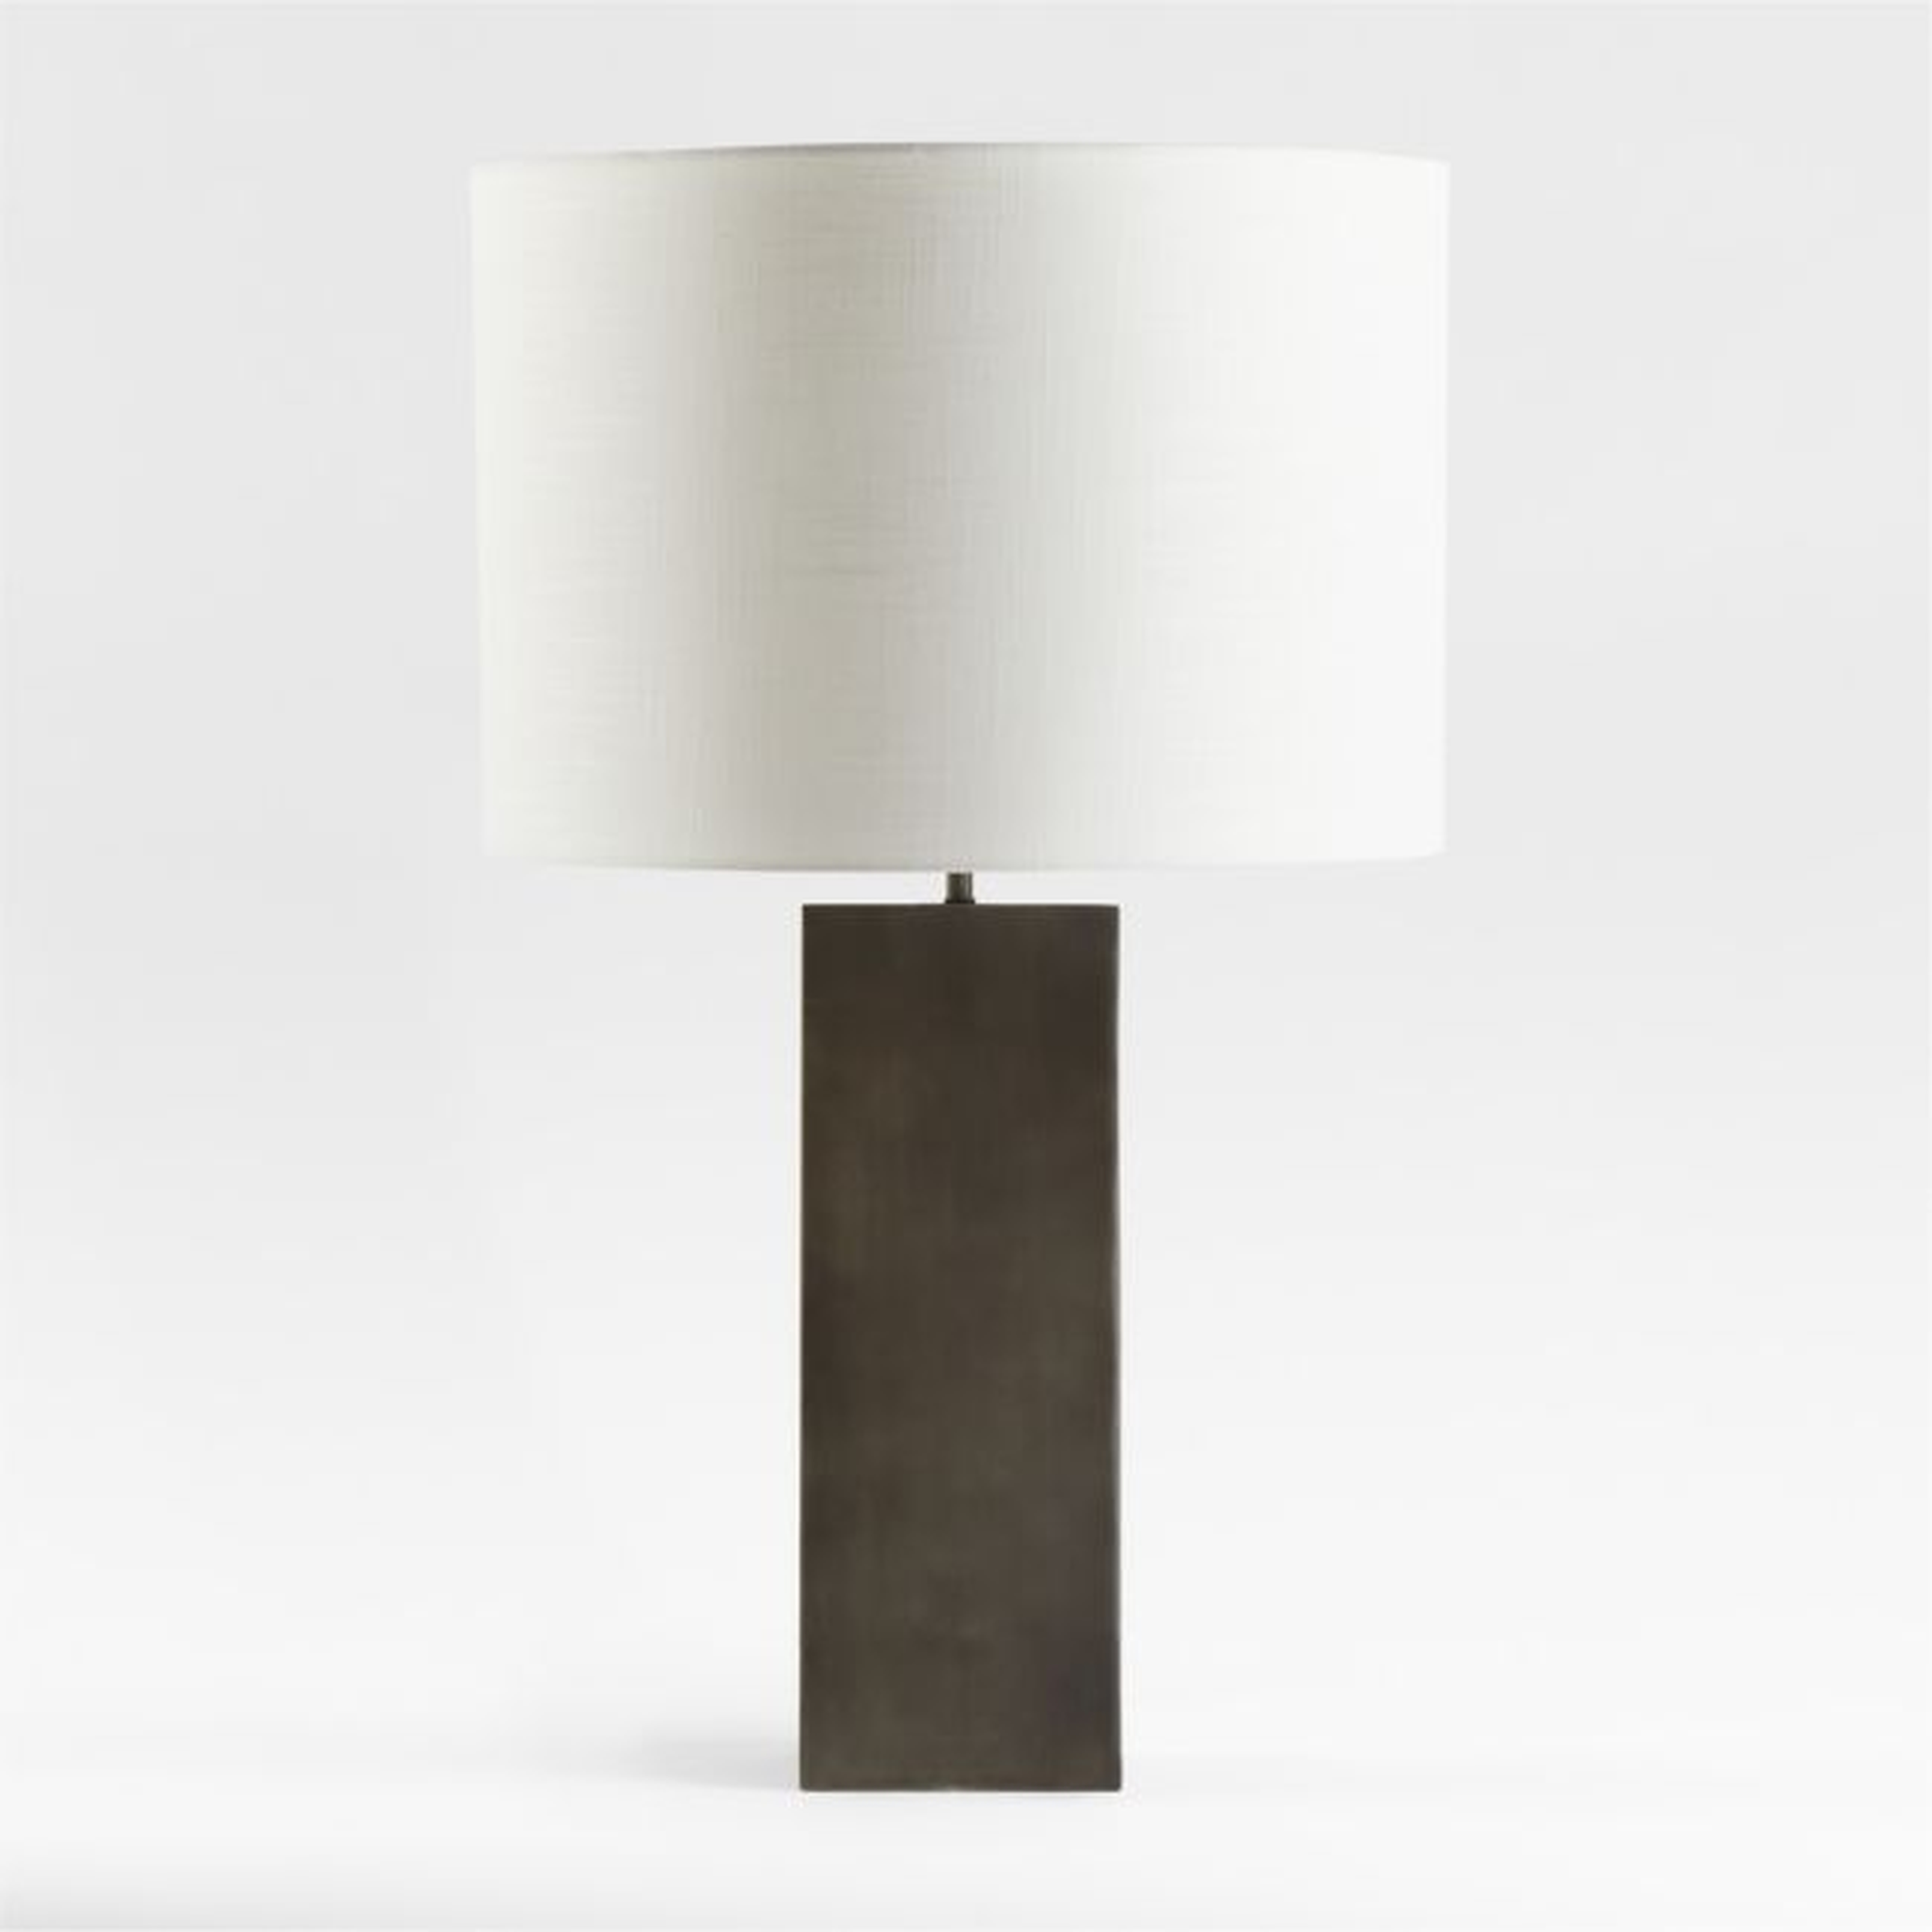 Folie Black Square Table Lamp with Drum Shade - Crate and Barrel